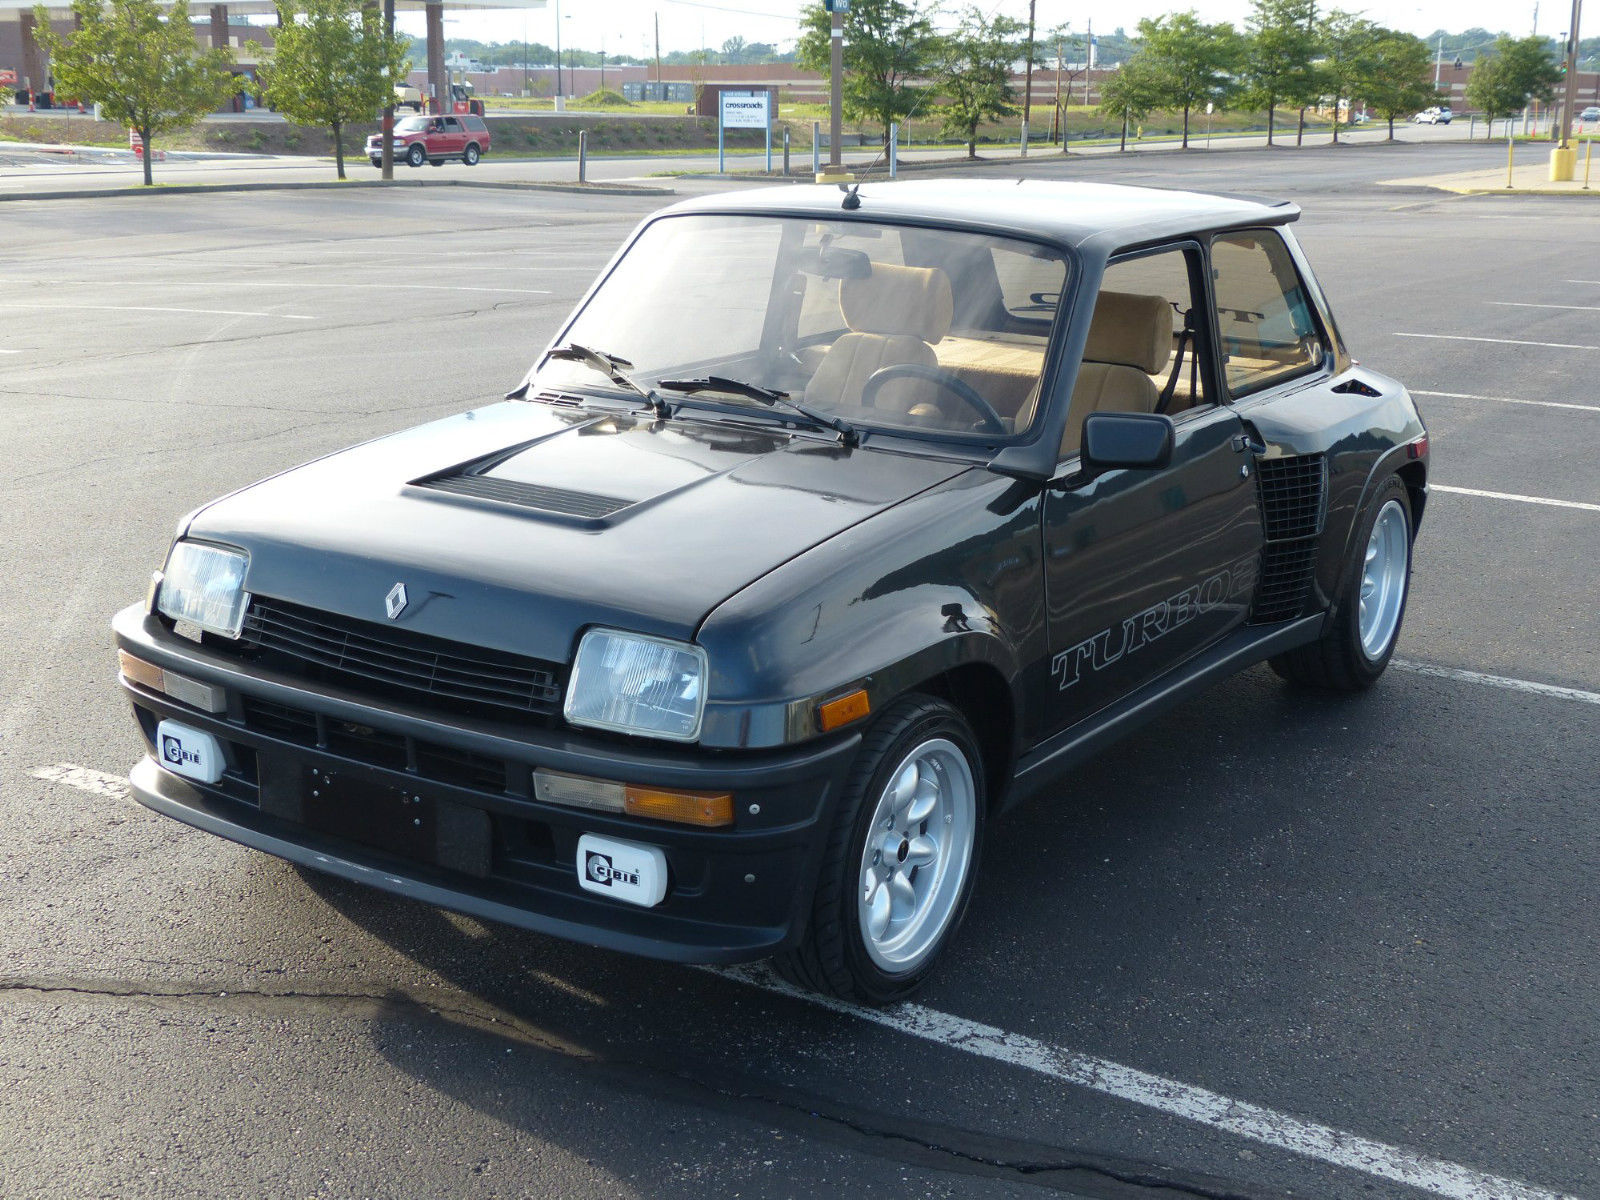 Original Renault 5 Turbo Fetches 72 000 On Ebay Carscoops